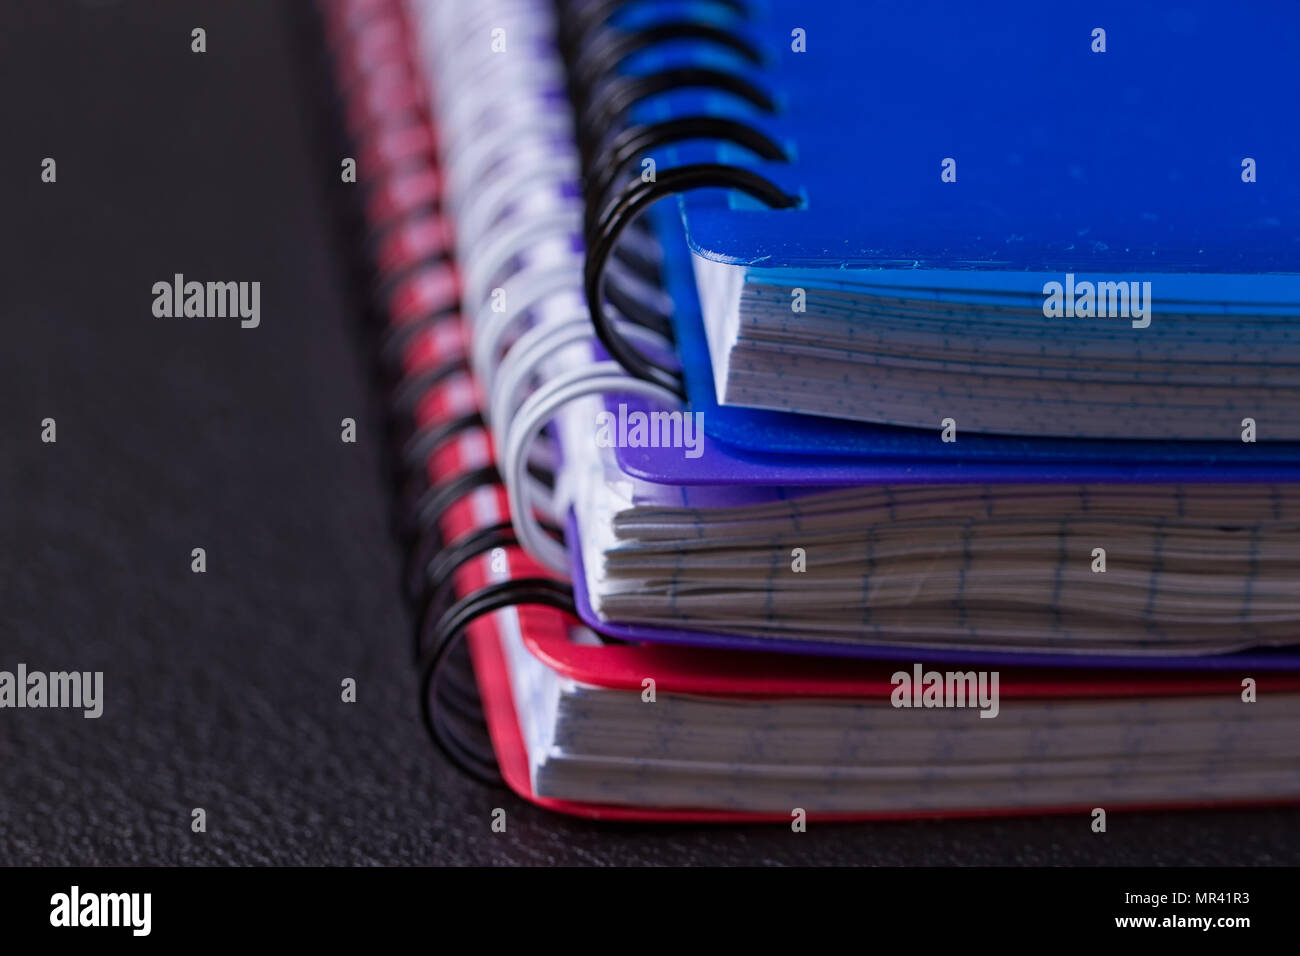 Several multi-colored notebooks on a spiral on a black background Stock Photo